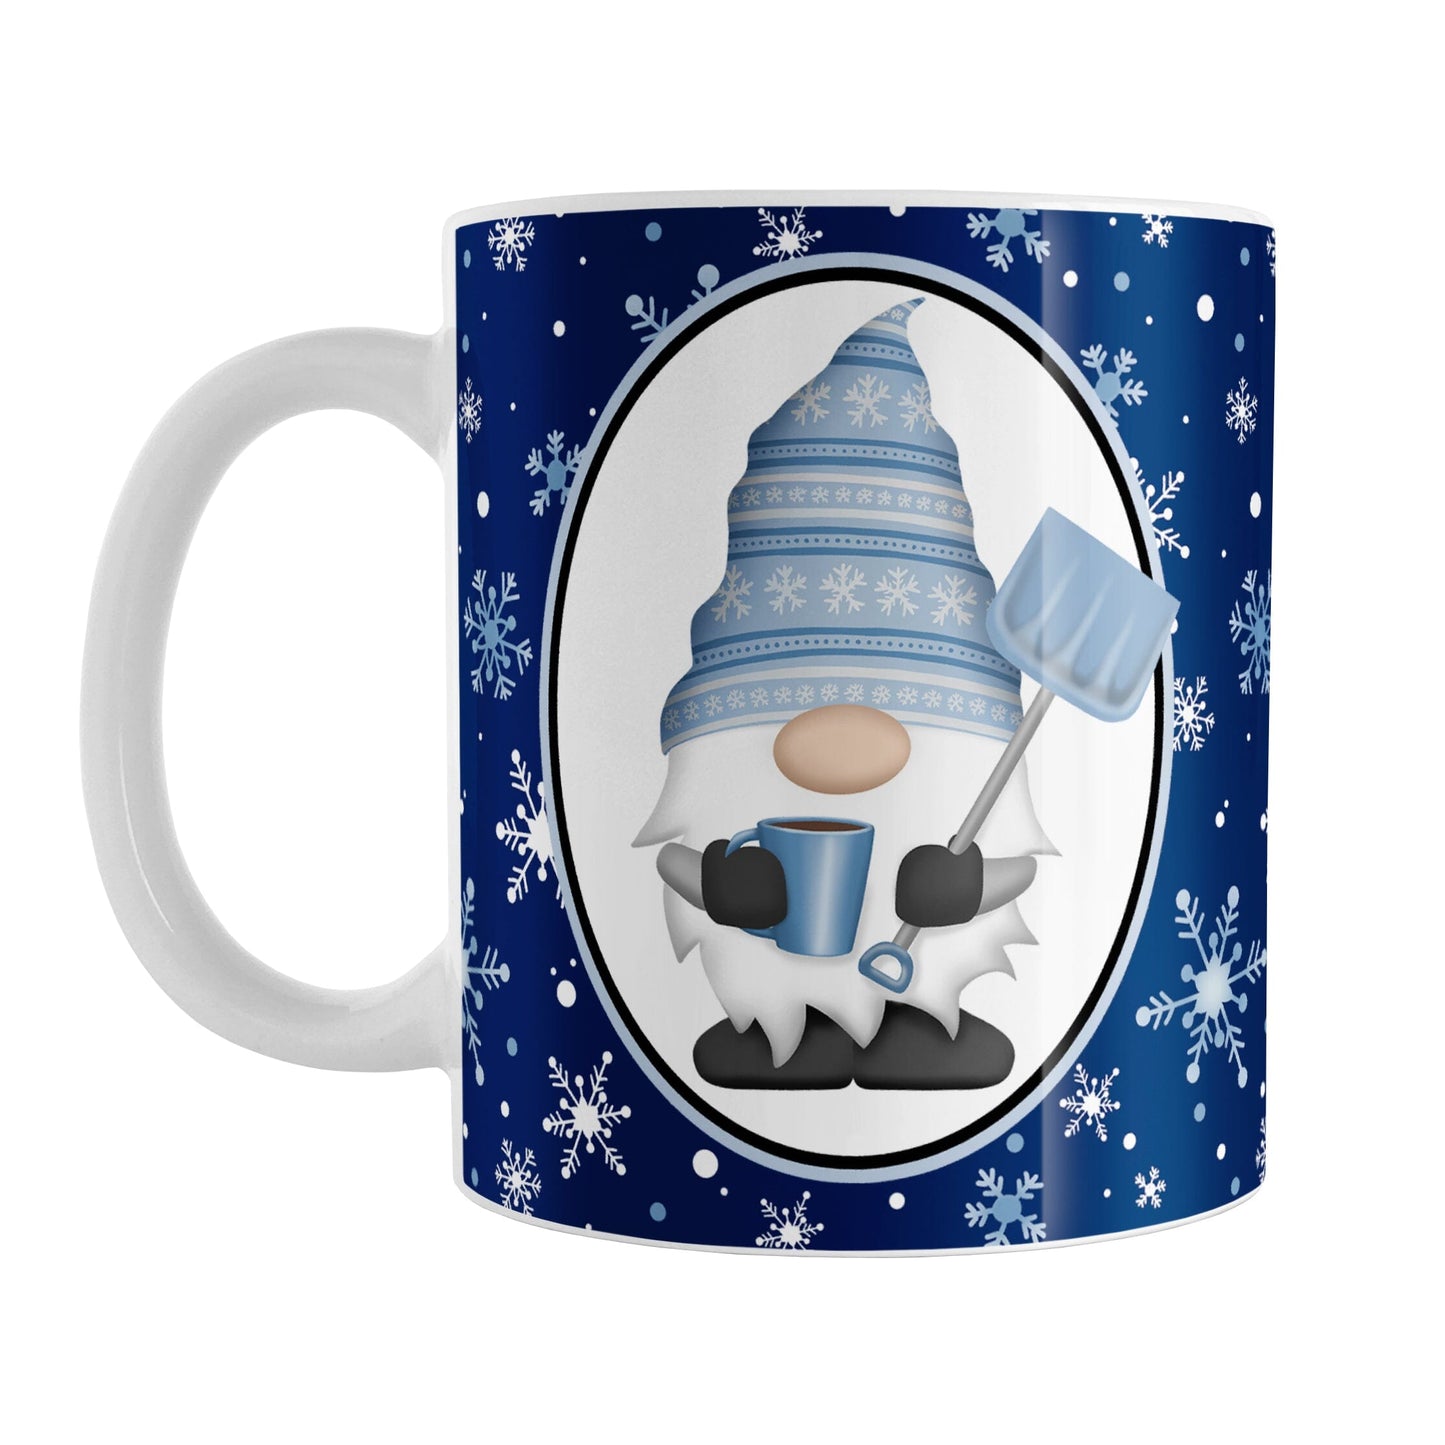 Blue Gnome Snowflakes Mug (11oz) at Amy's Coffee Mugs. A ceramic coffee mug designed with an adorable gnome wearing a festive blue winter hat and holding a hot beverage and a snow shovel in a white oval over a blue night snowflakes background that wraps around the mug to the handle.